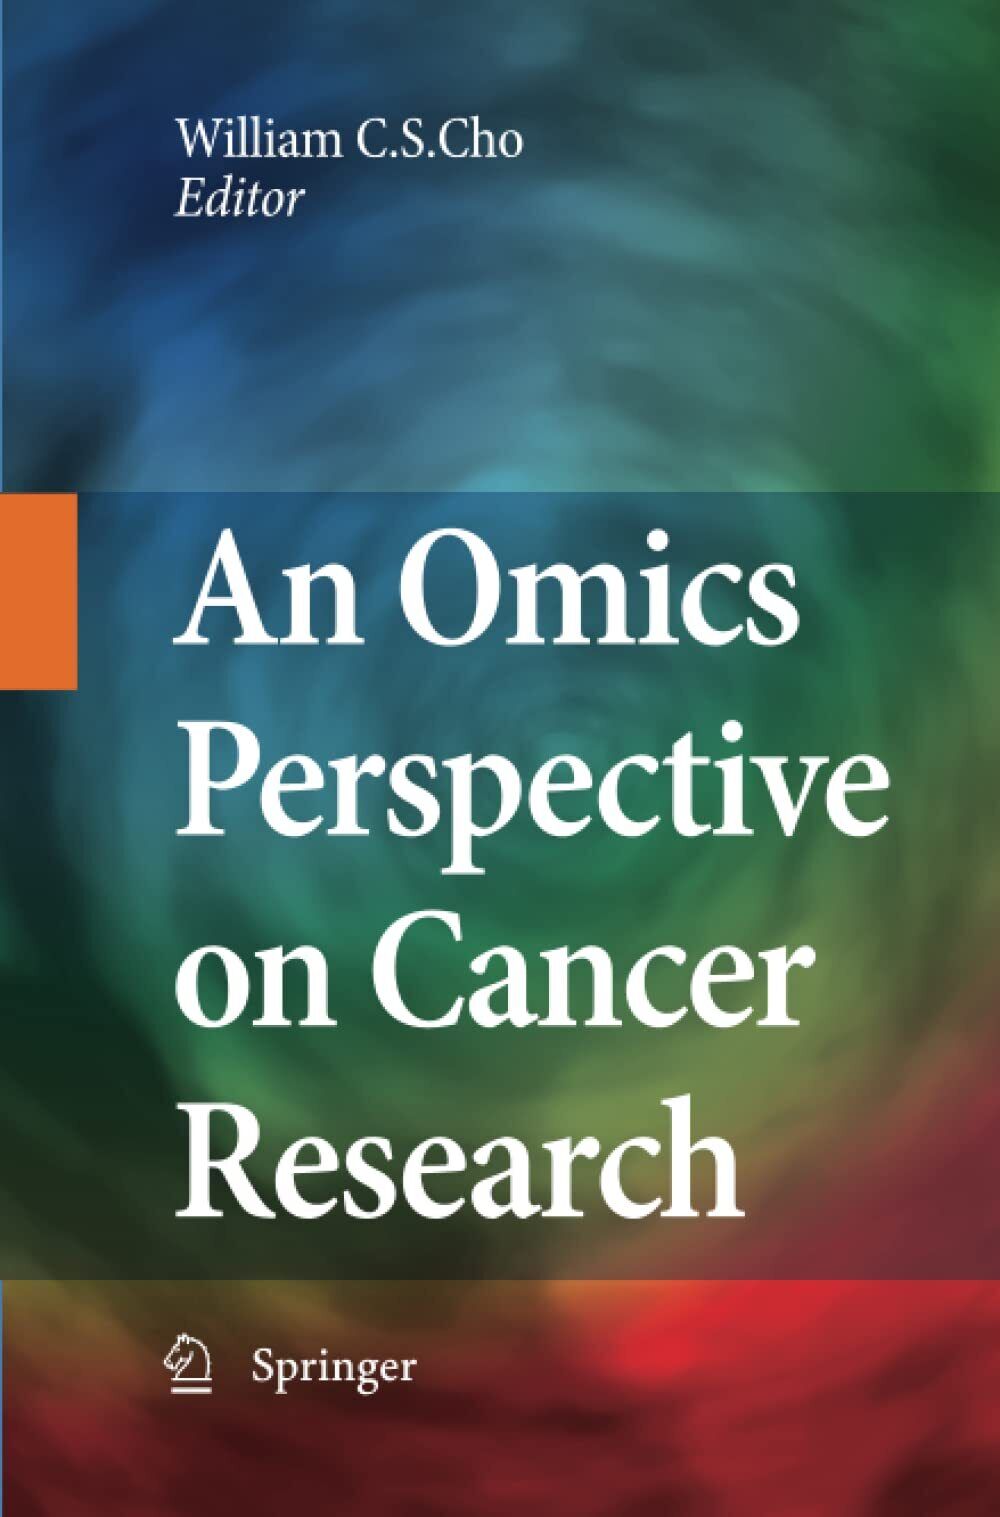 An Omics Perspective on Cancer Research - William C.S. Cho - Springer, 2014